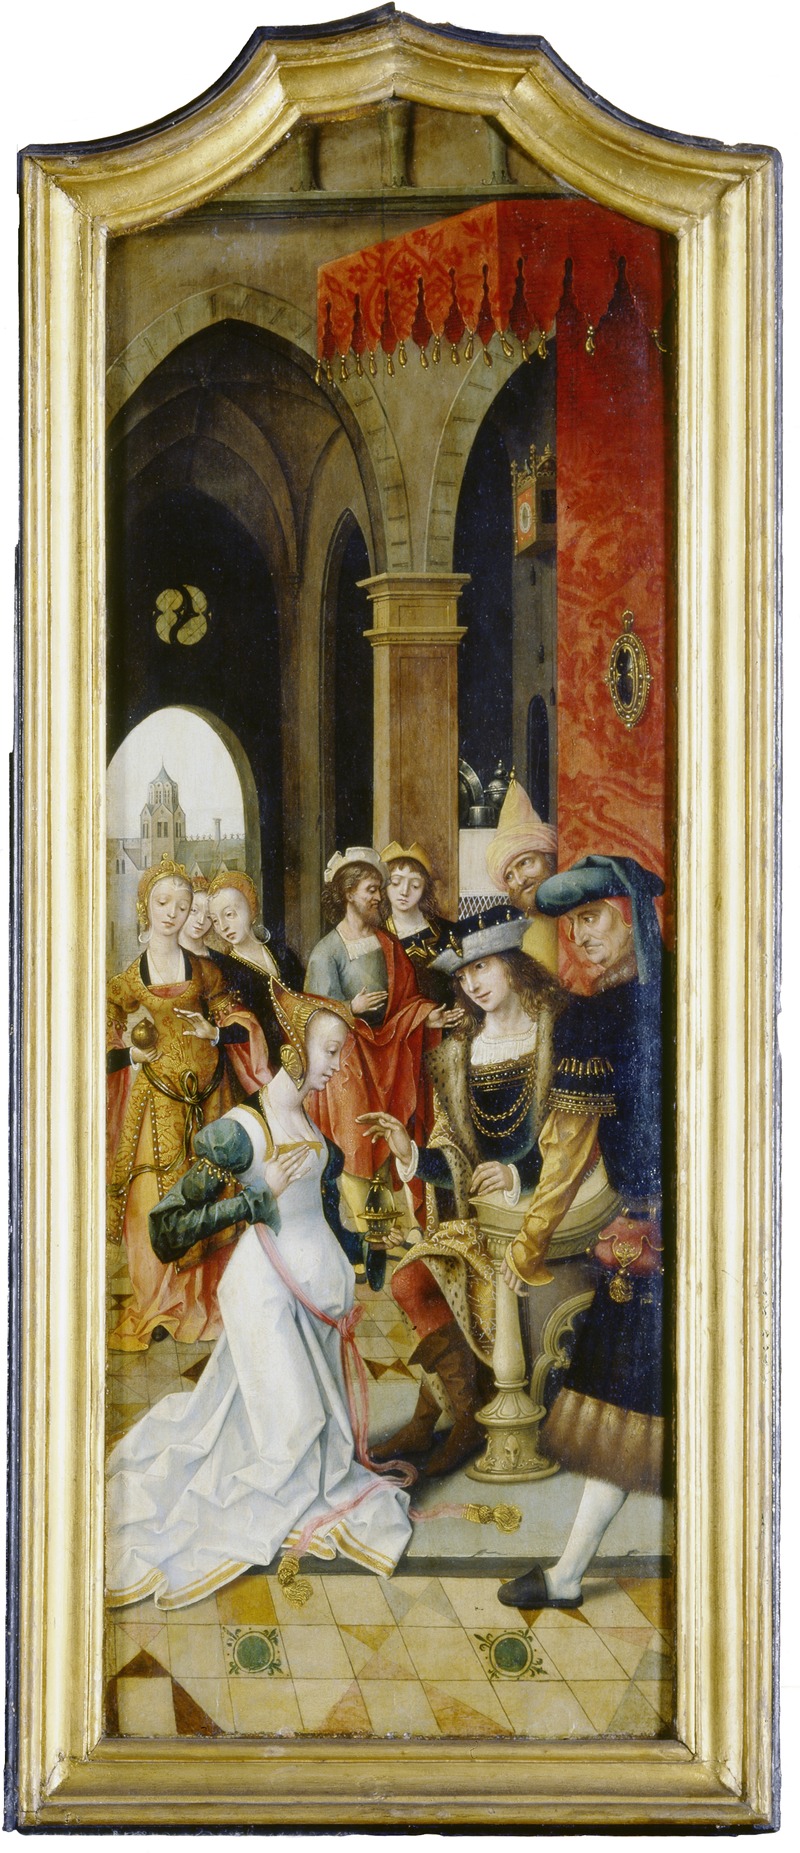 Master of the von Groote Adoration - King Solomon Receiving the Queen of Sheba